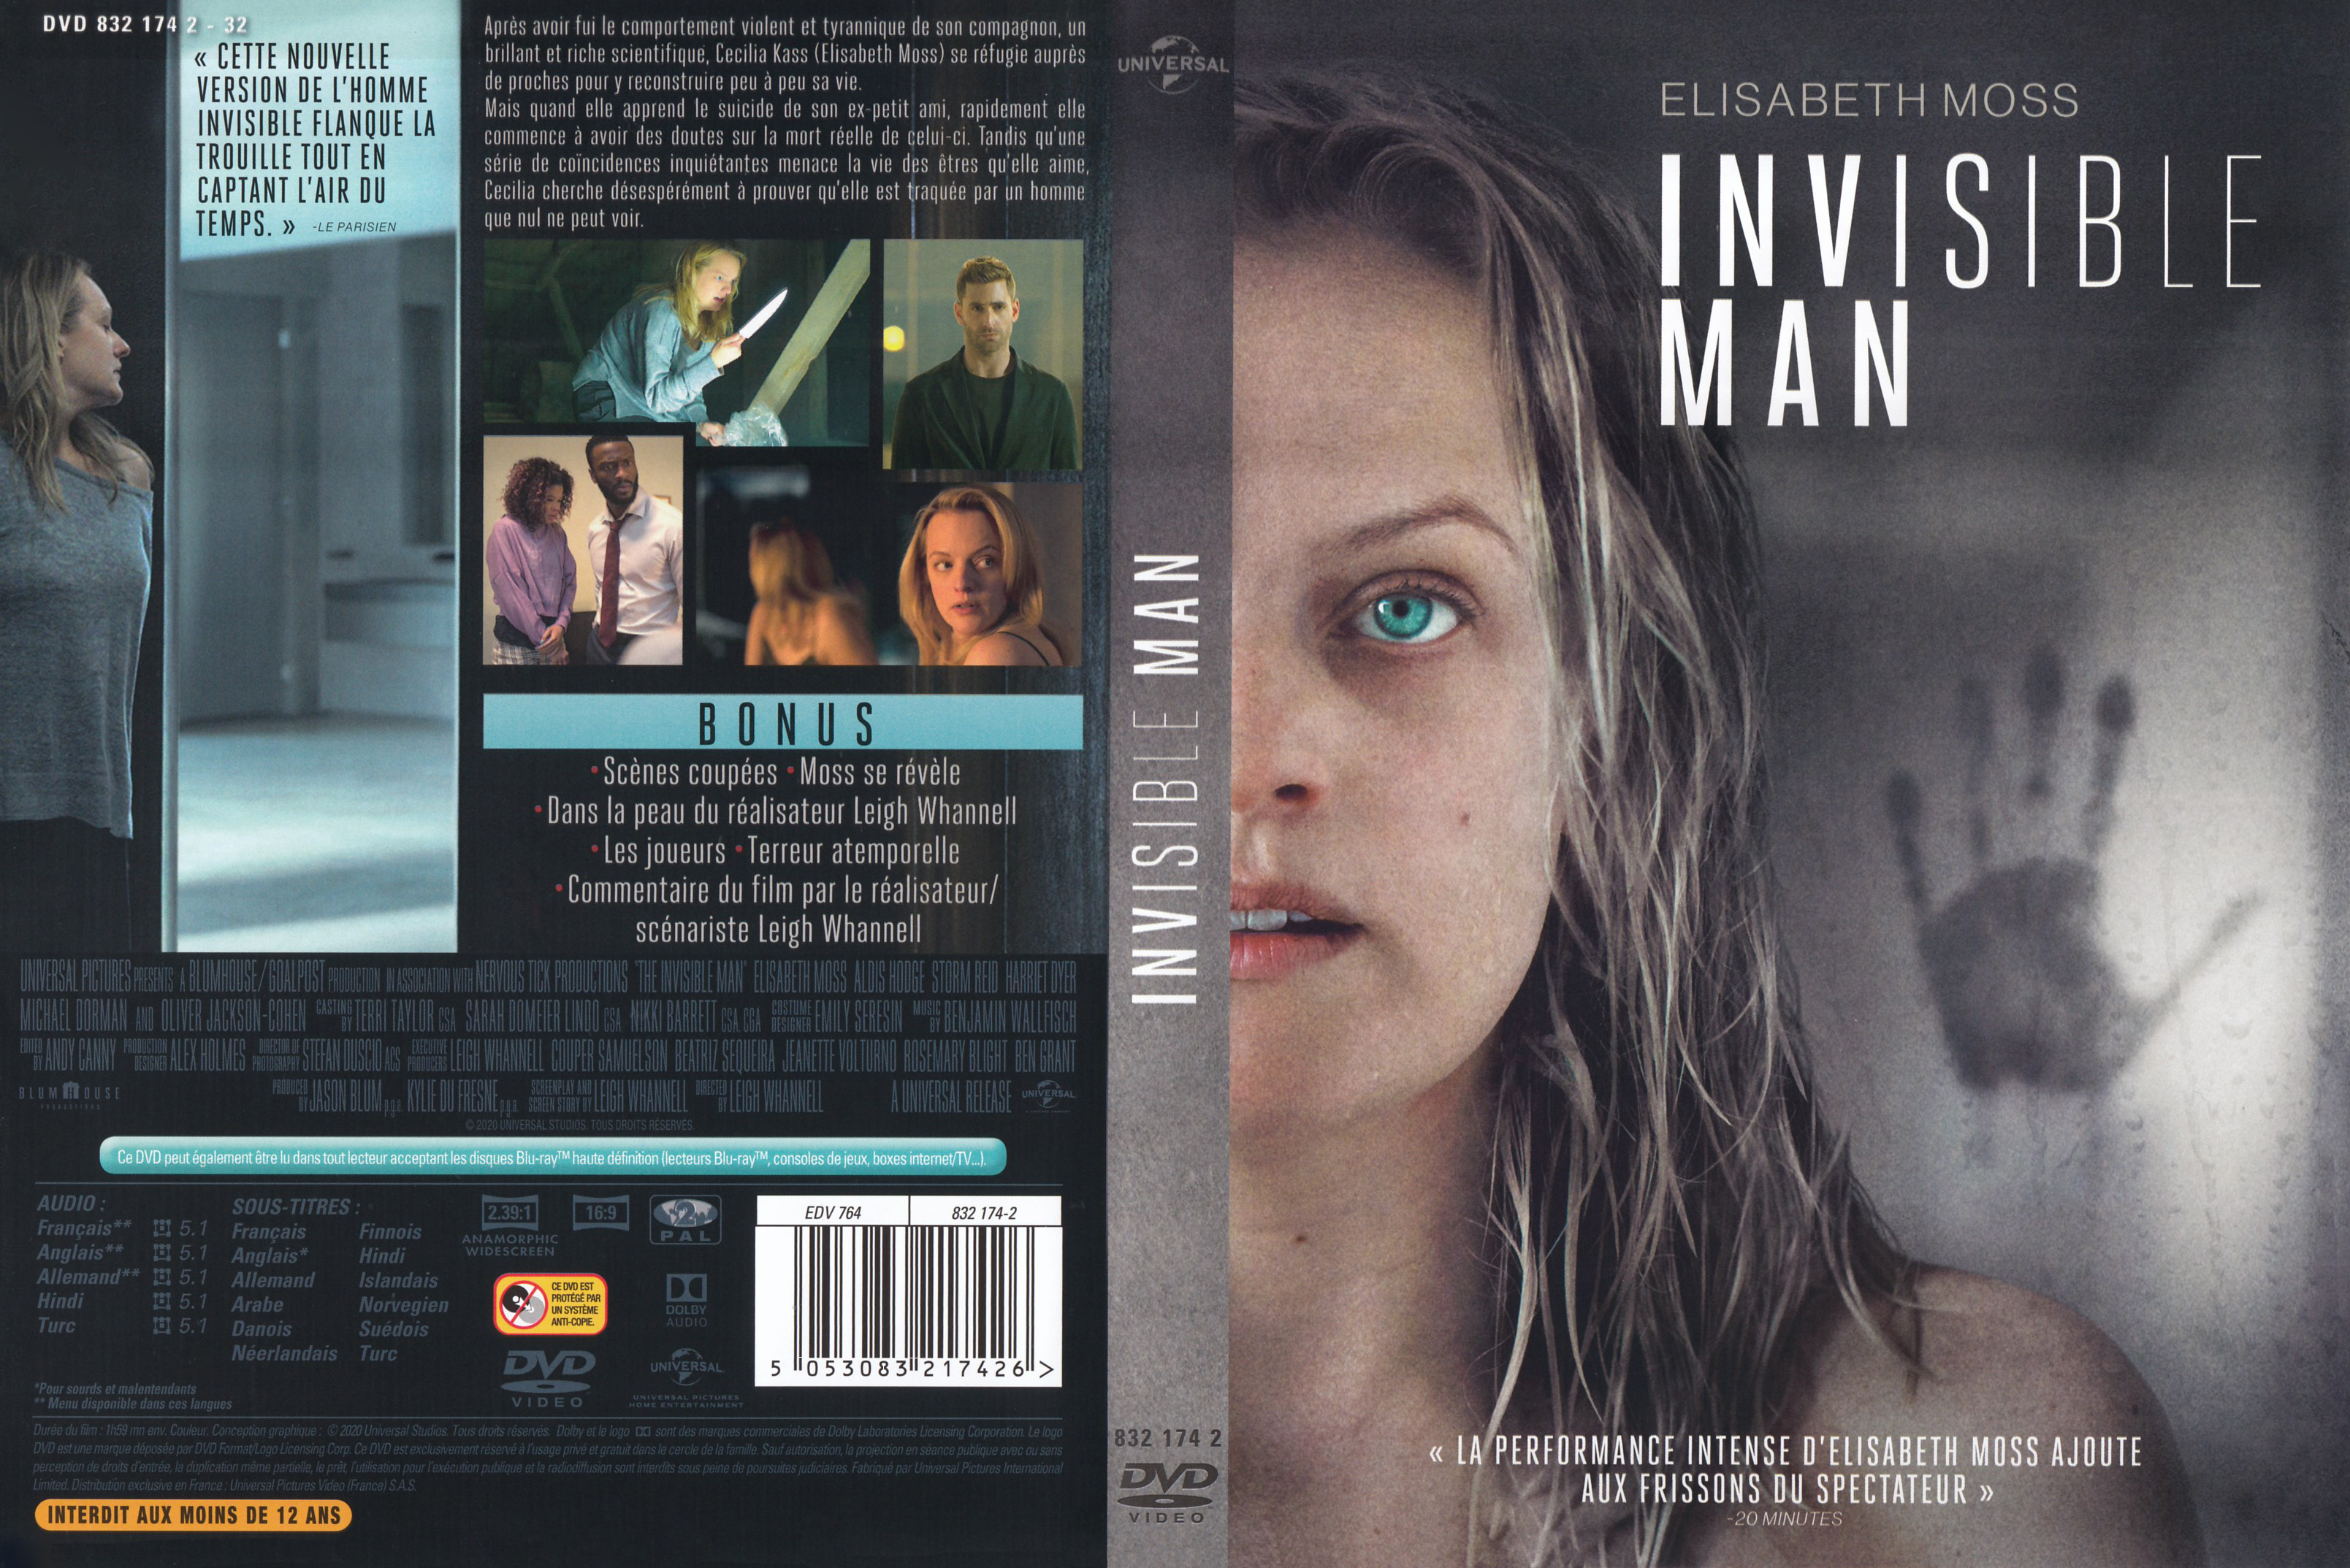 Jaquette DVD Invisible man